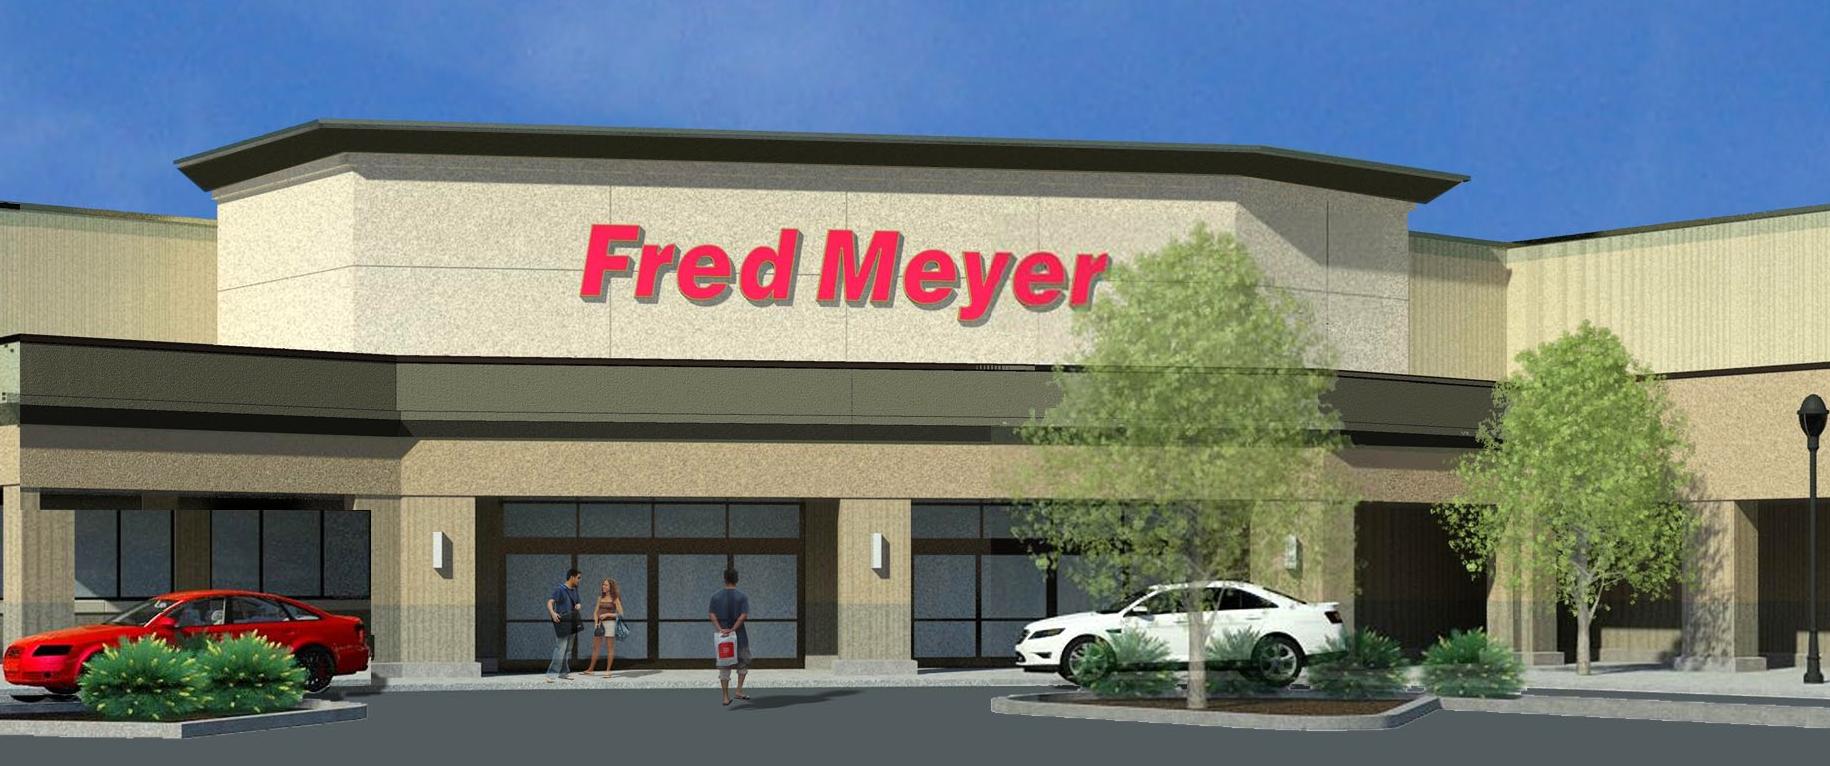 fred-meyers-2016